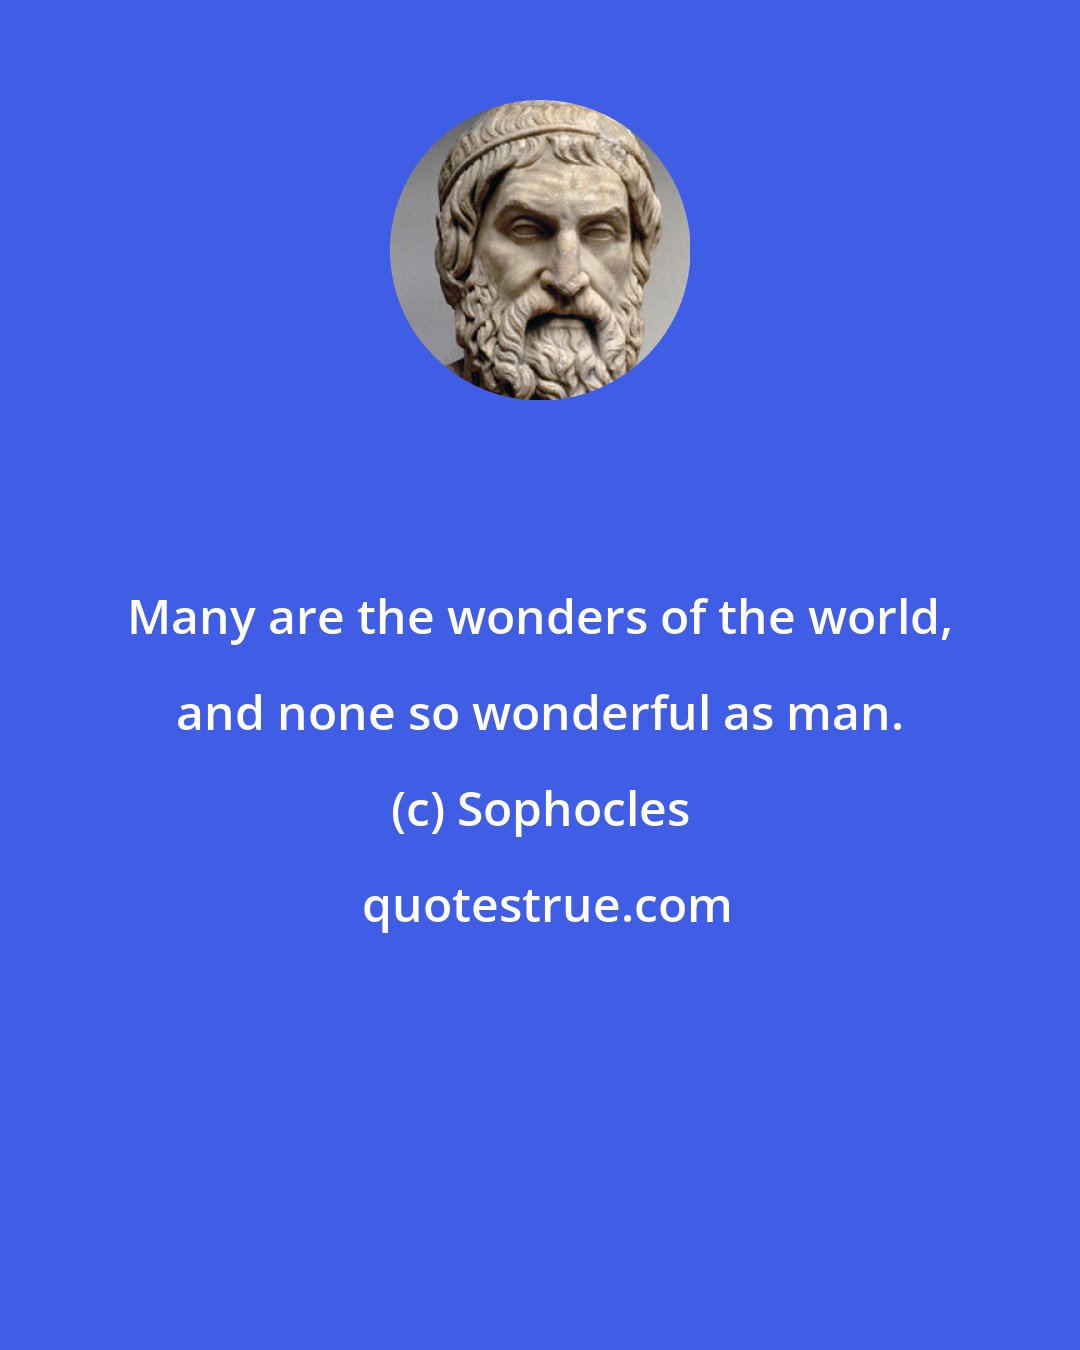 Sophocles: Many are the wonders of the world, and none so wonderful as man.